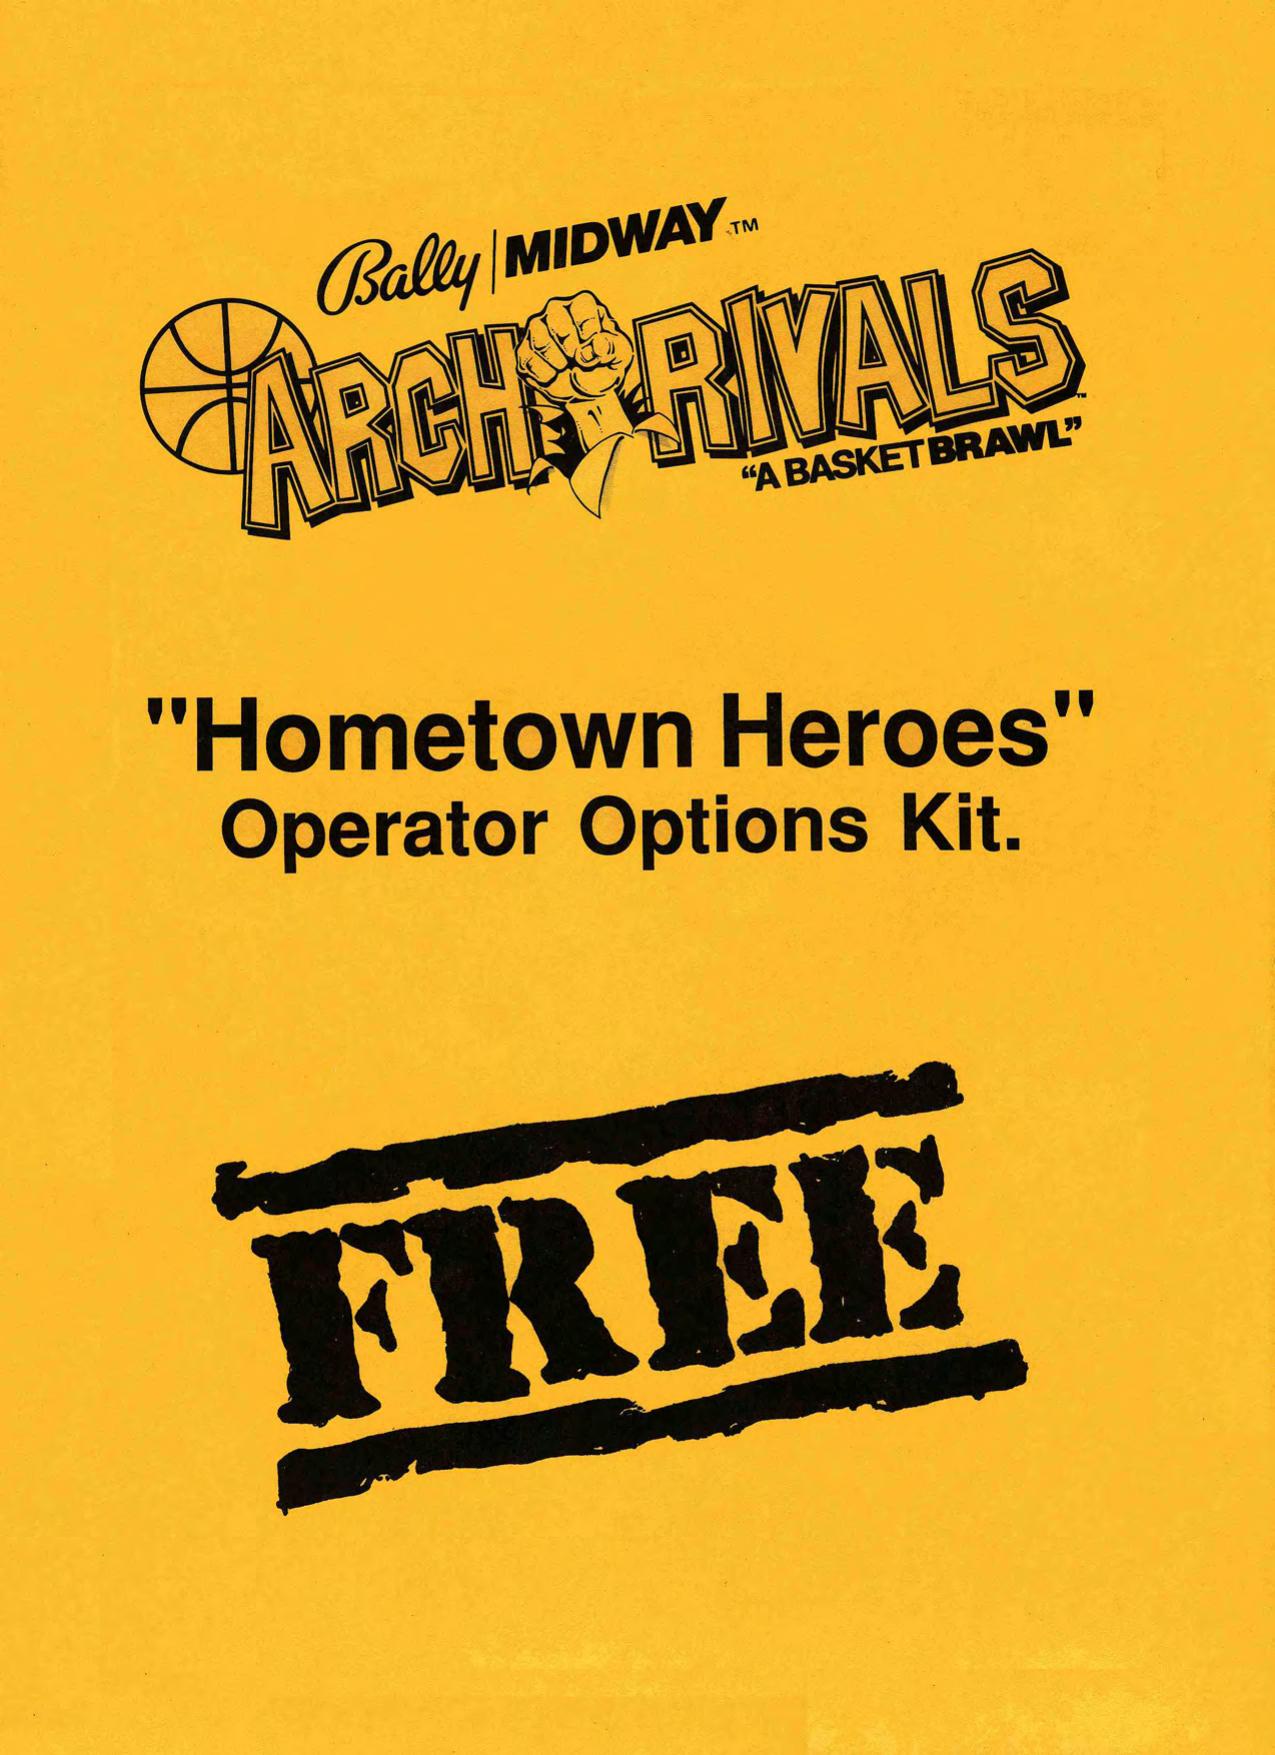 Arch Rivals Hometown Hero Options Kit